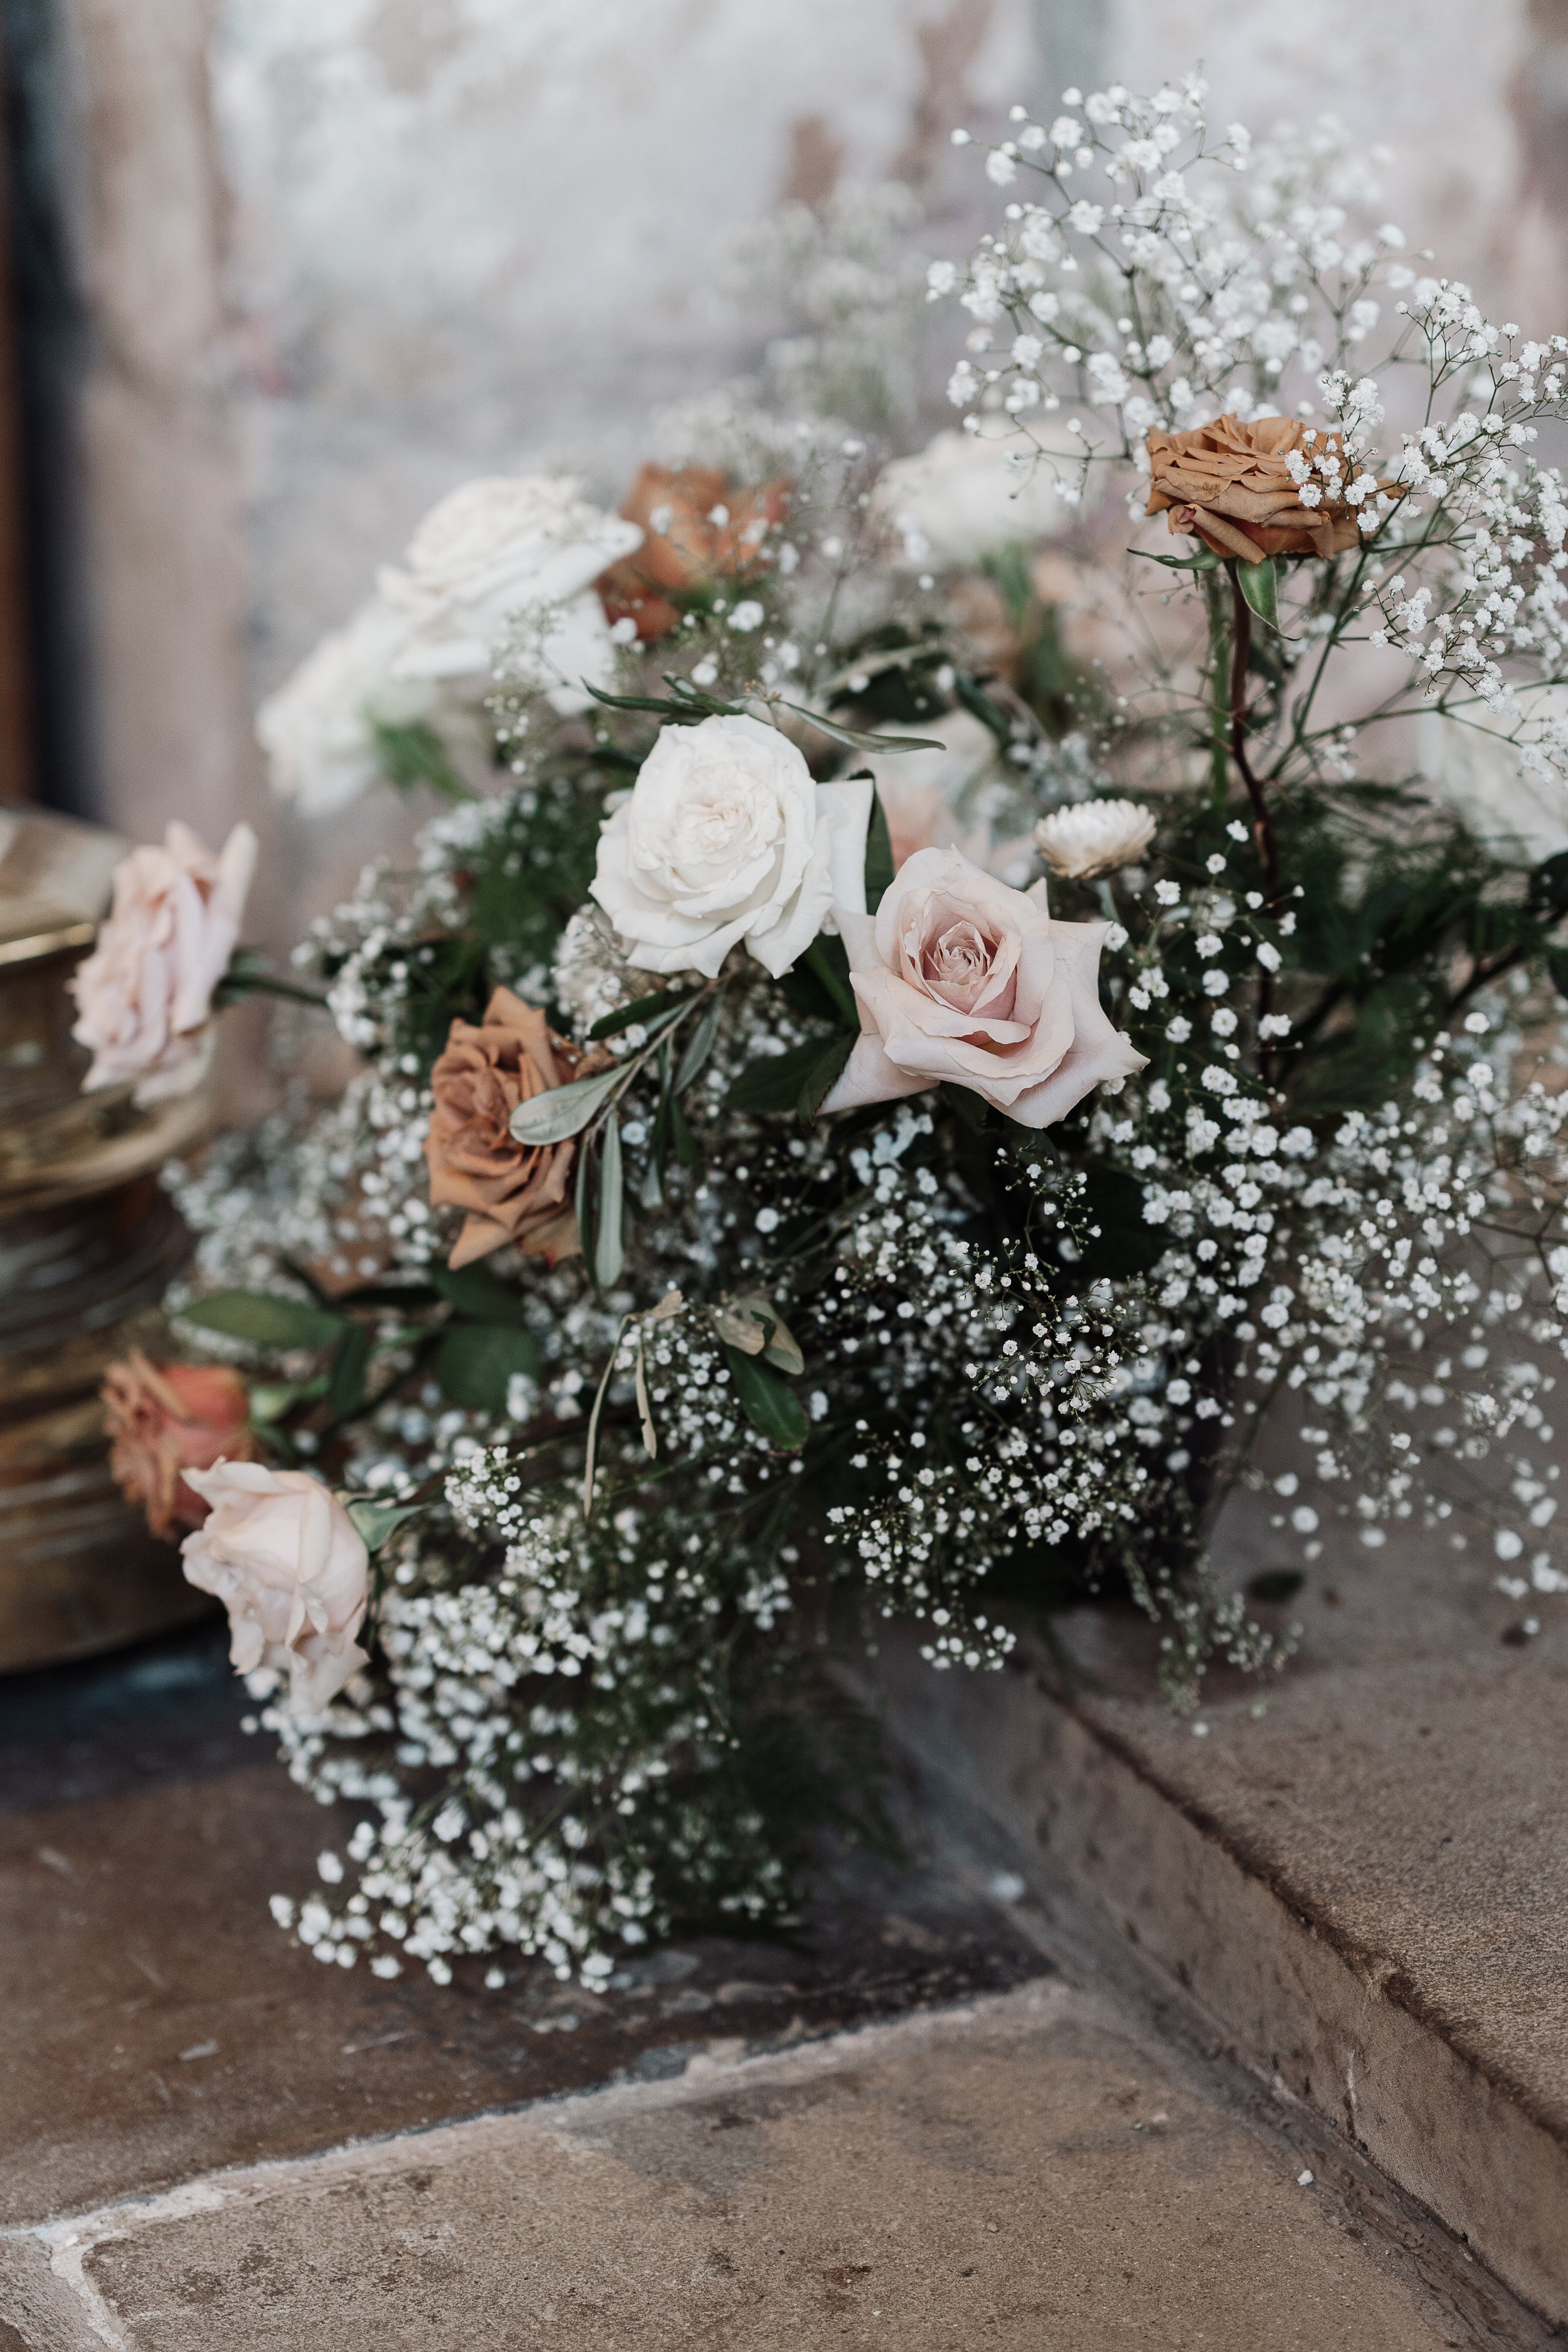 Toffee, pink and white roses in fluffy gypsophillia